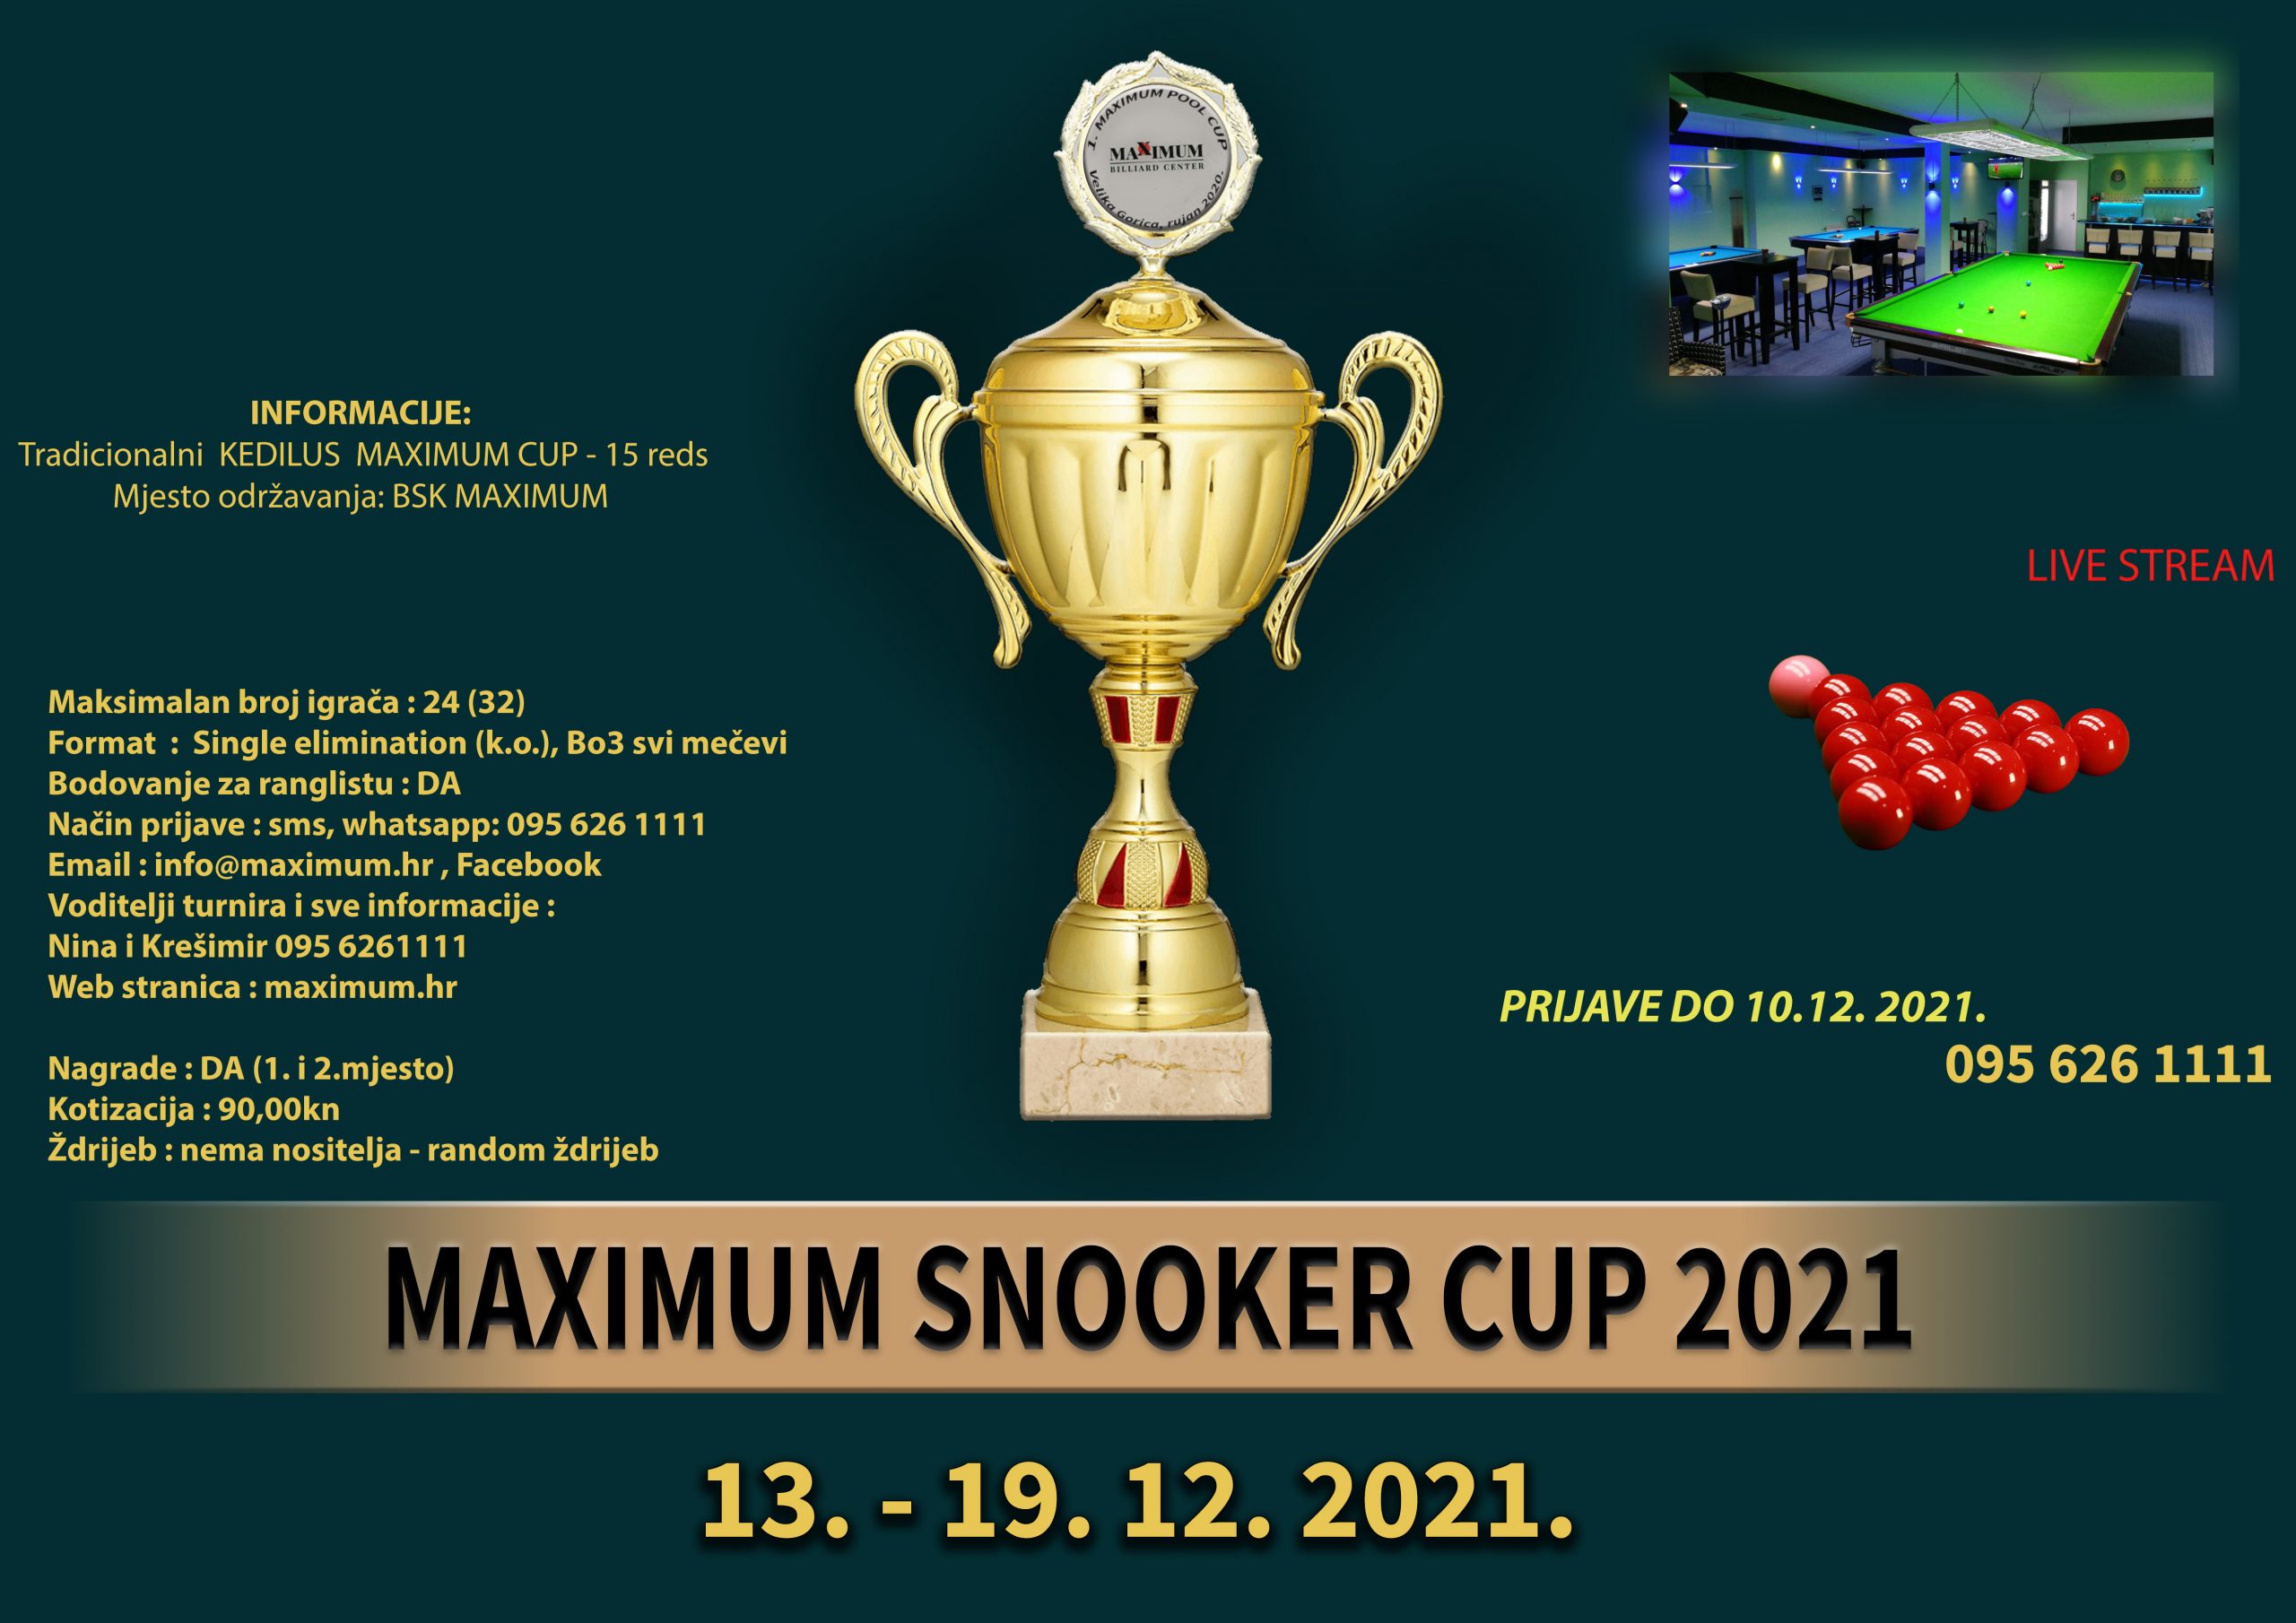 Snooker CUP 2021 - total 2